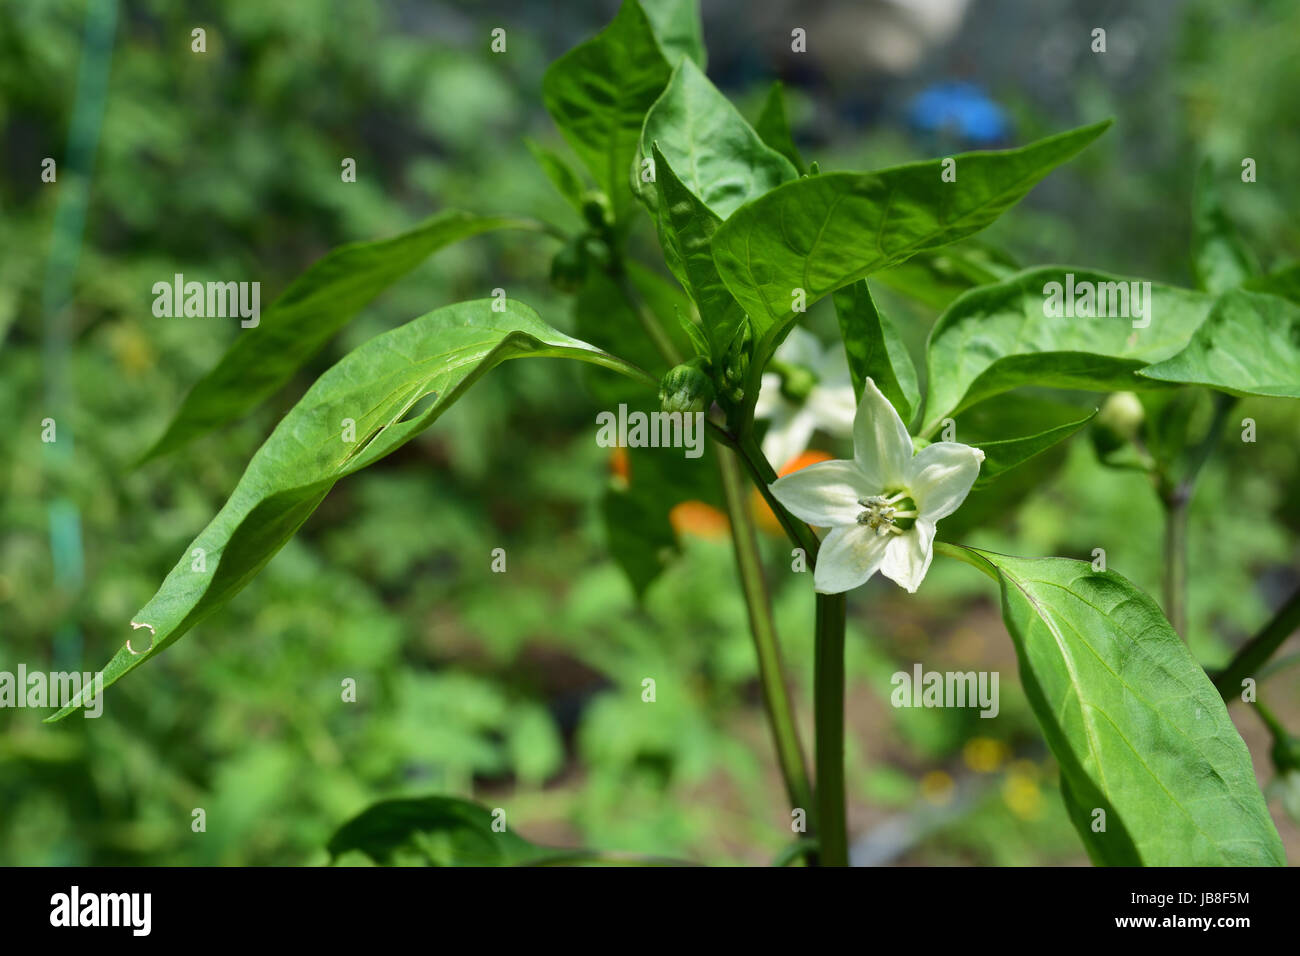 Green pepper plant cultivated in home greenhouse. Capsicum annuum is cultivated for a wide variety of shapes and sizes of peppers, both mild and hot. Stock Photo